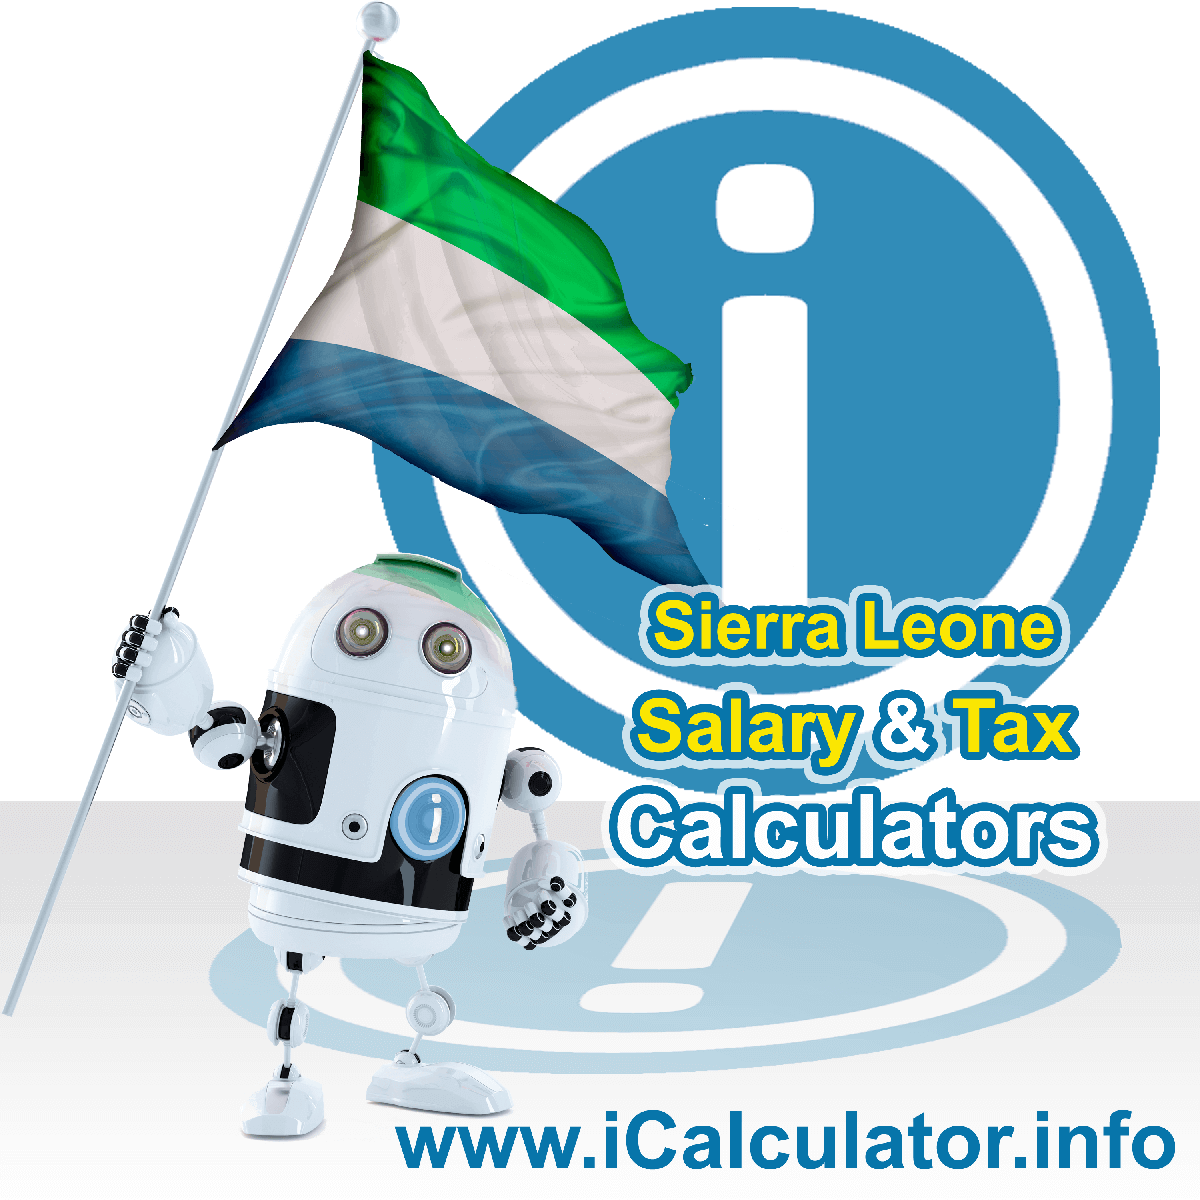 Sierra Leone Salary Calculator. This image shows the Sierra Leoneese flag and information relating to the tax formula for the Sierra Leone Tax Calculator